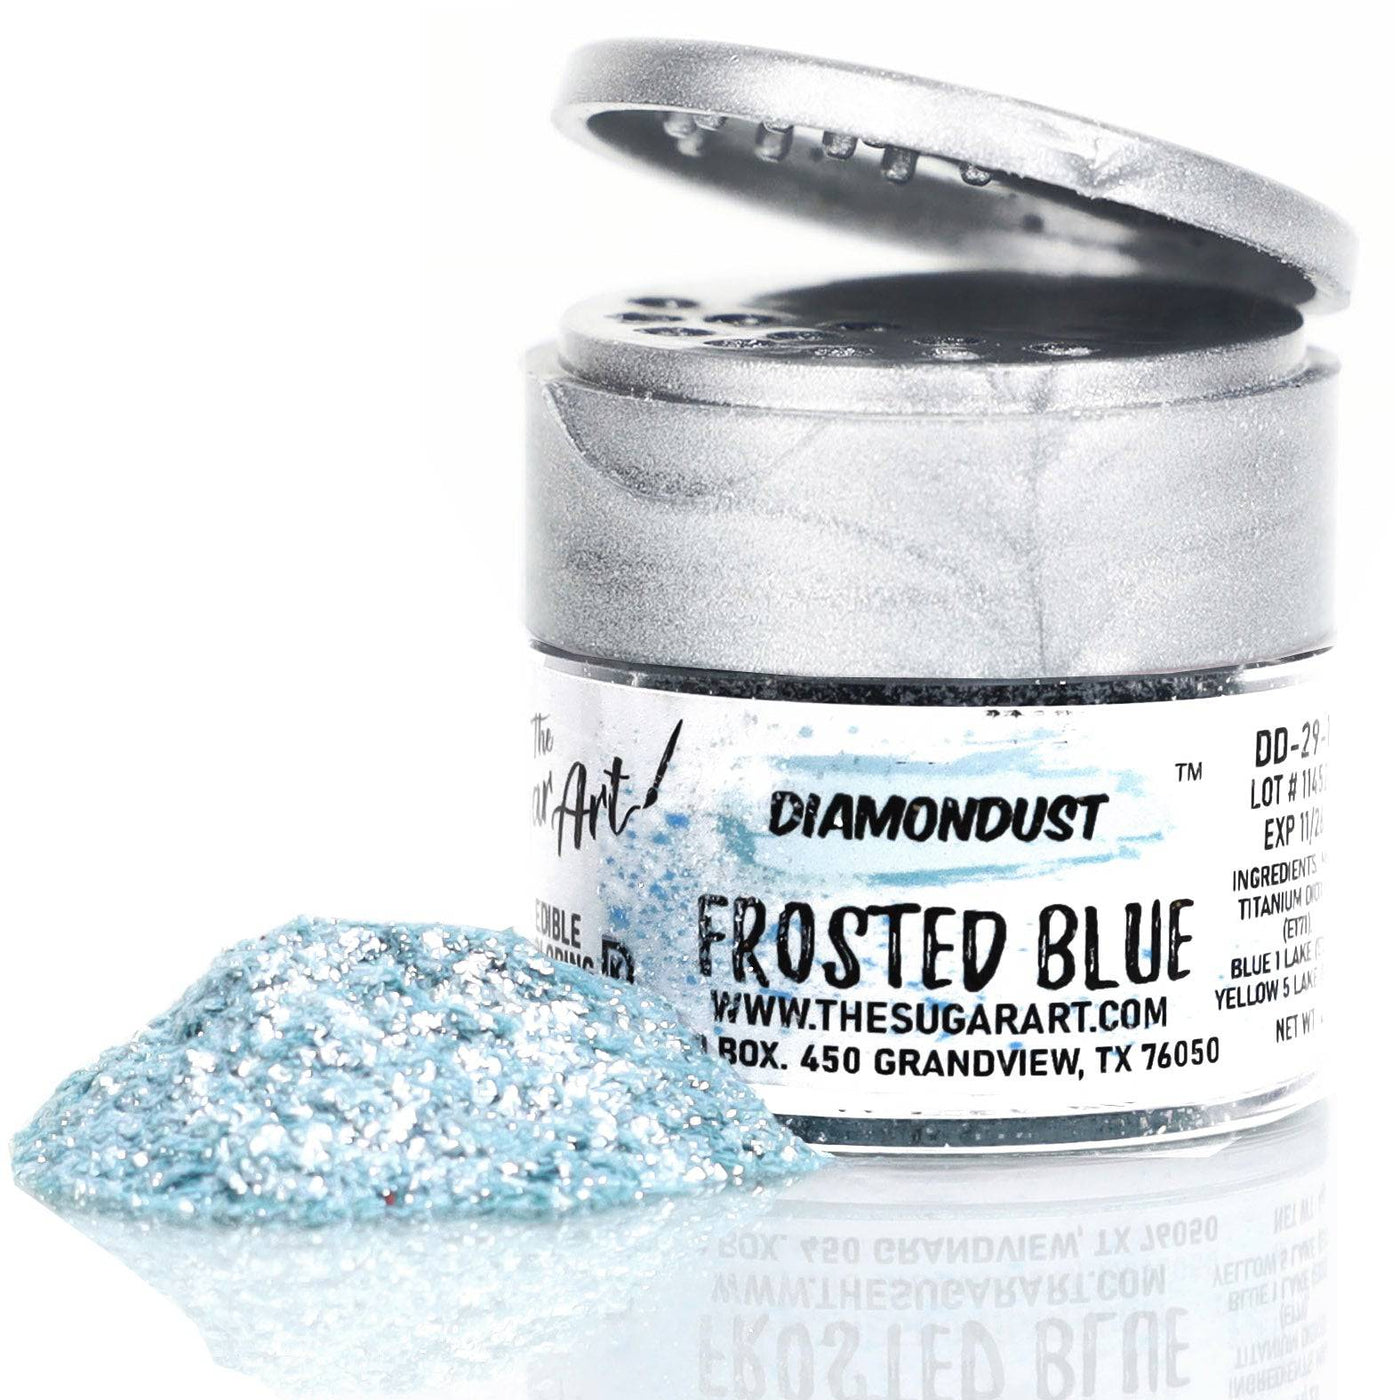 Frosted Blue Edible Glitter - The Sugar Art, Inc.